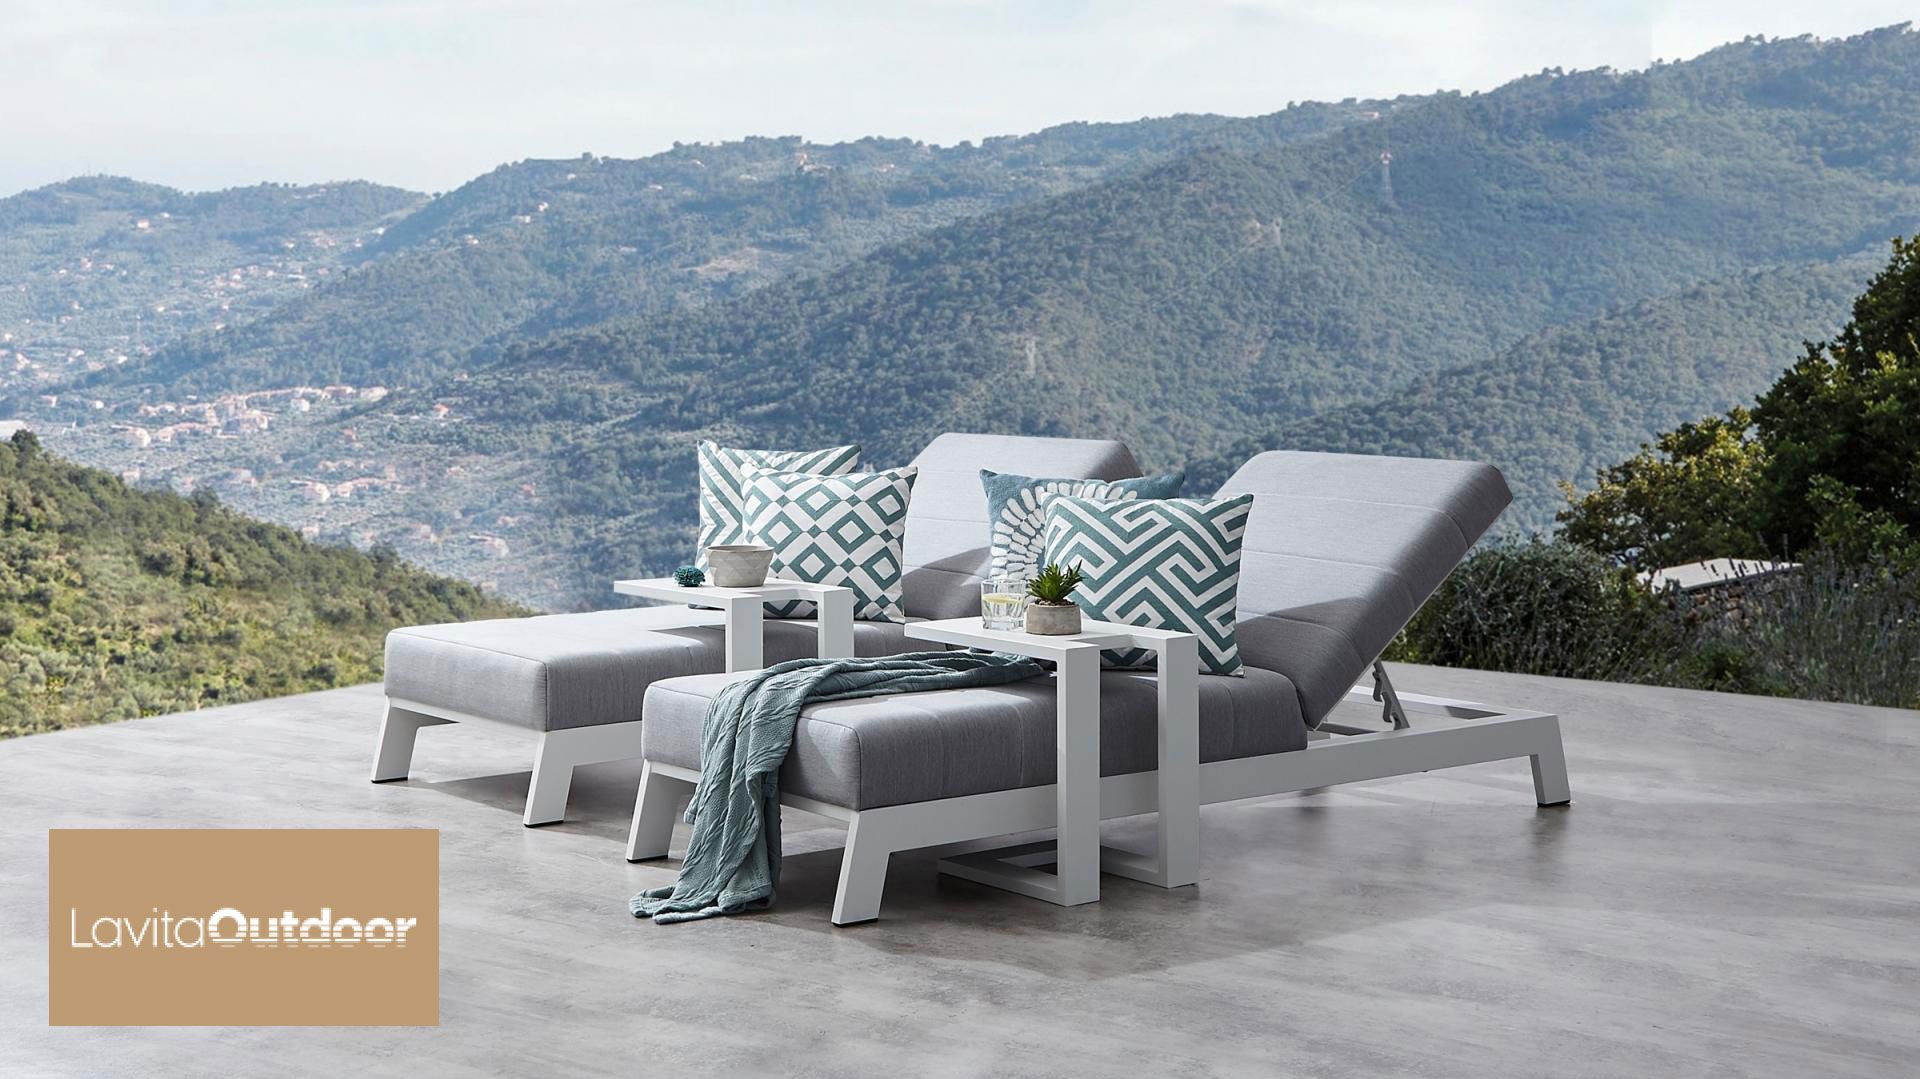 Introducing Lavita Outdoor: Affordable Luxury Outdoor Furniture